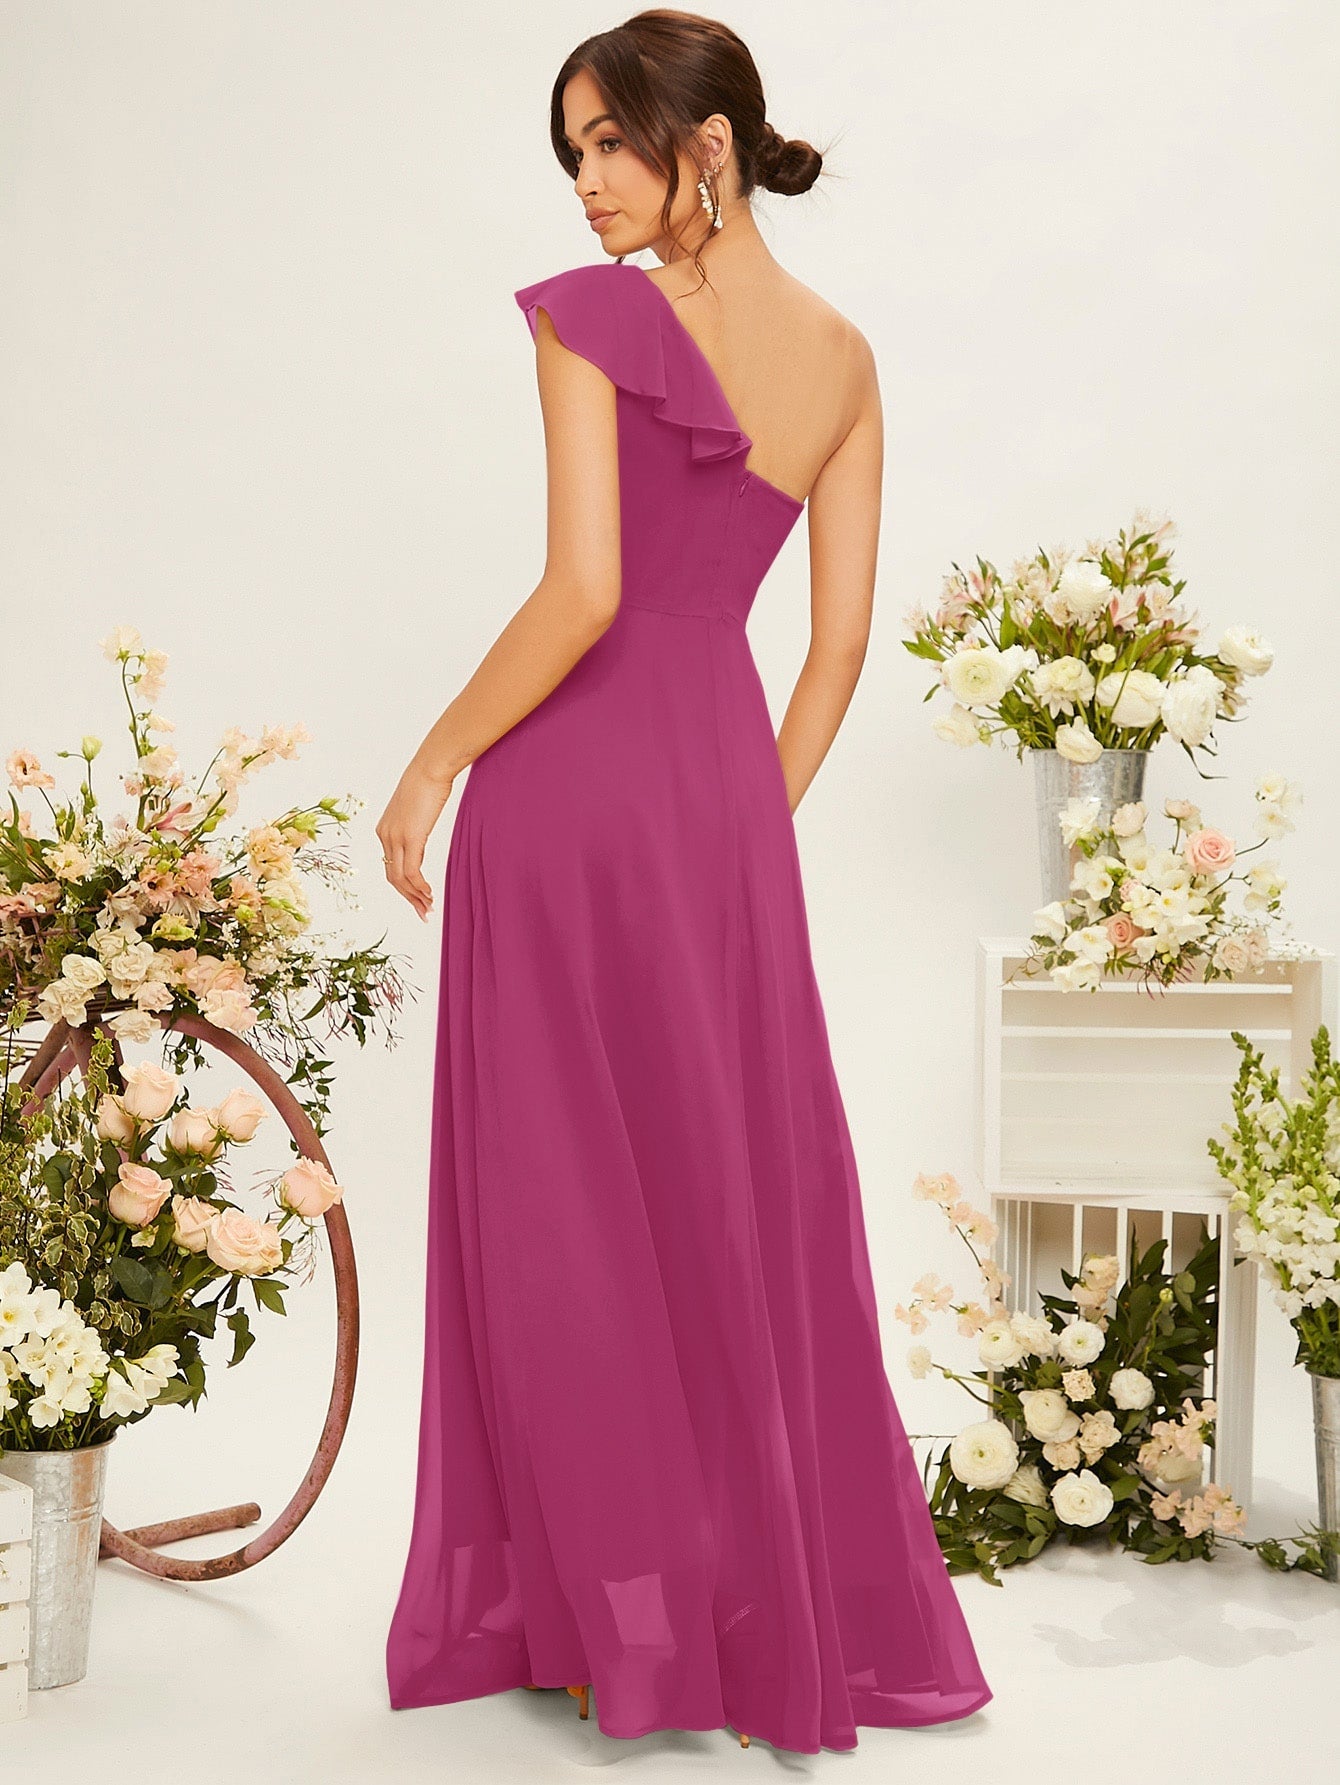 One Shoulder Bridesmaid Dress - Ready to Ship